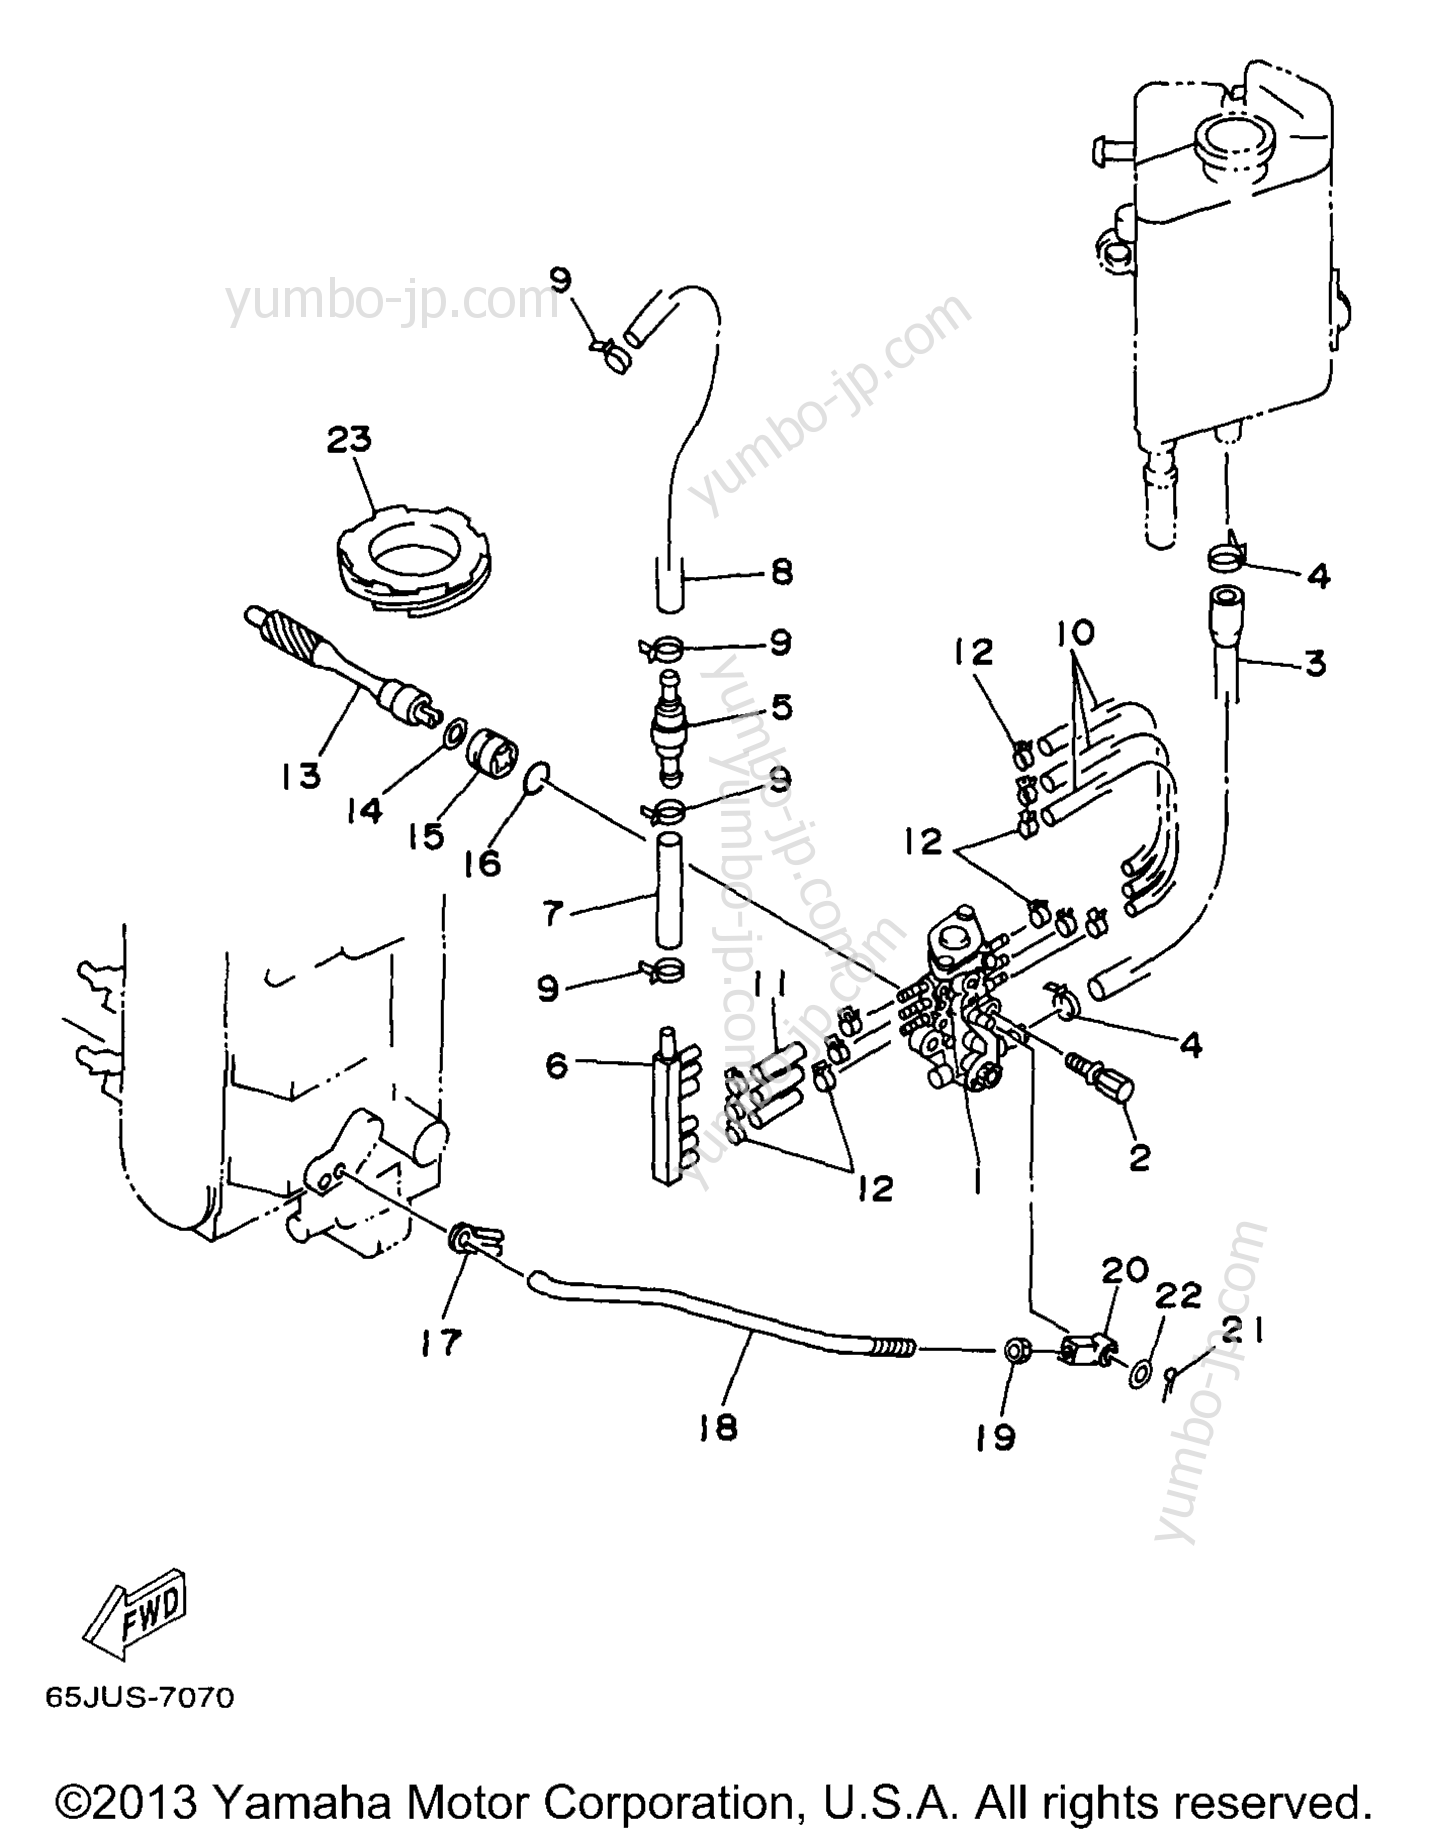 OIL PUMP for outboards YAMAHA S225TXRV 1997 year